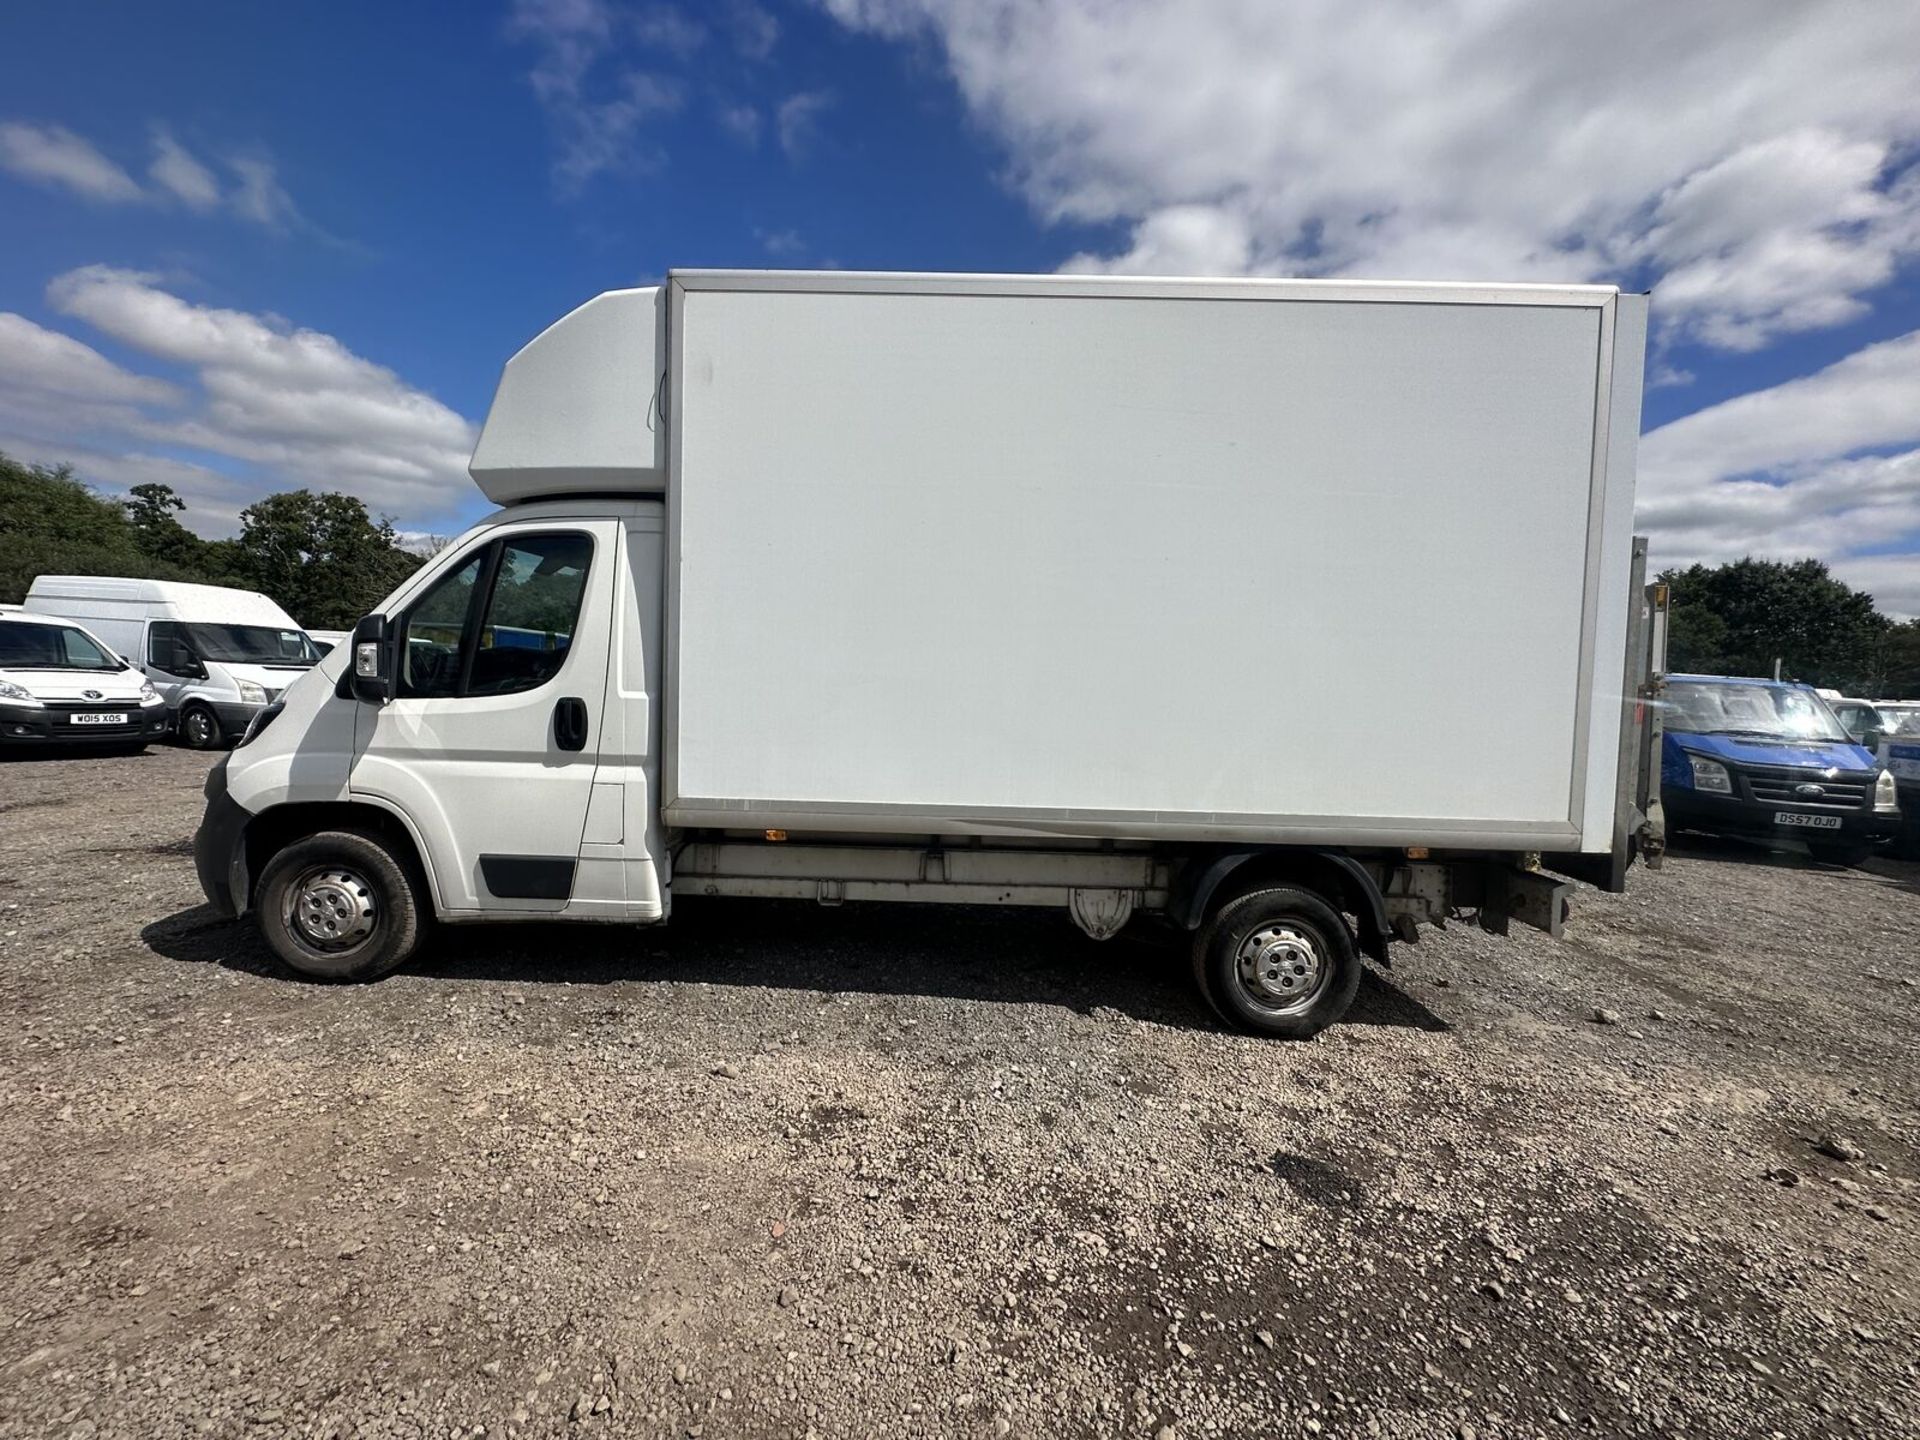 WHITE LUTON BOX WITH TAIL LIFT - 2017 WITH 100K MILES ON THE CLOCK